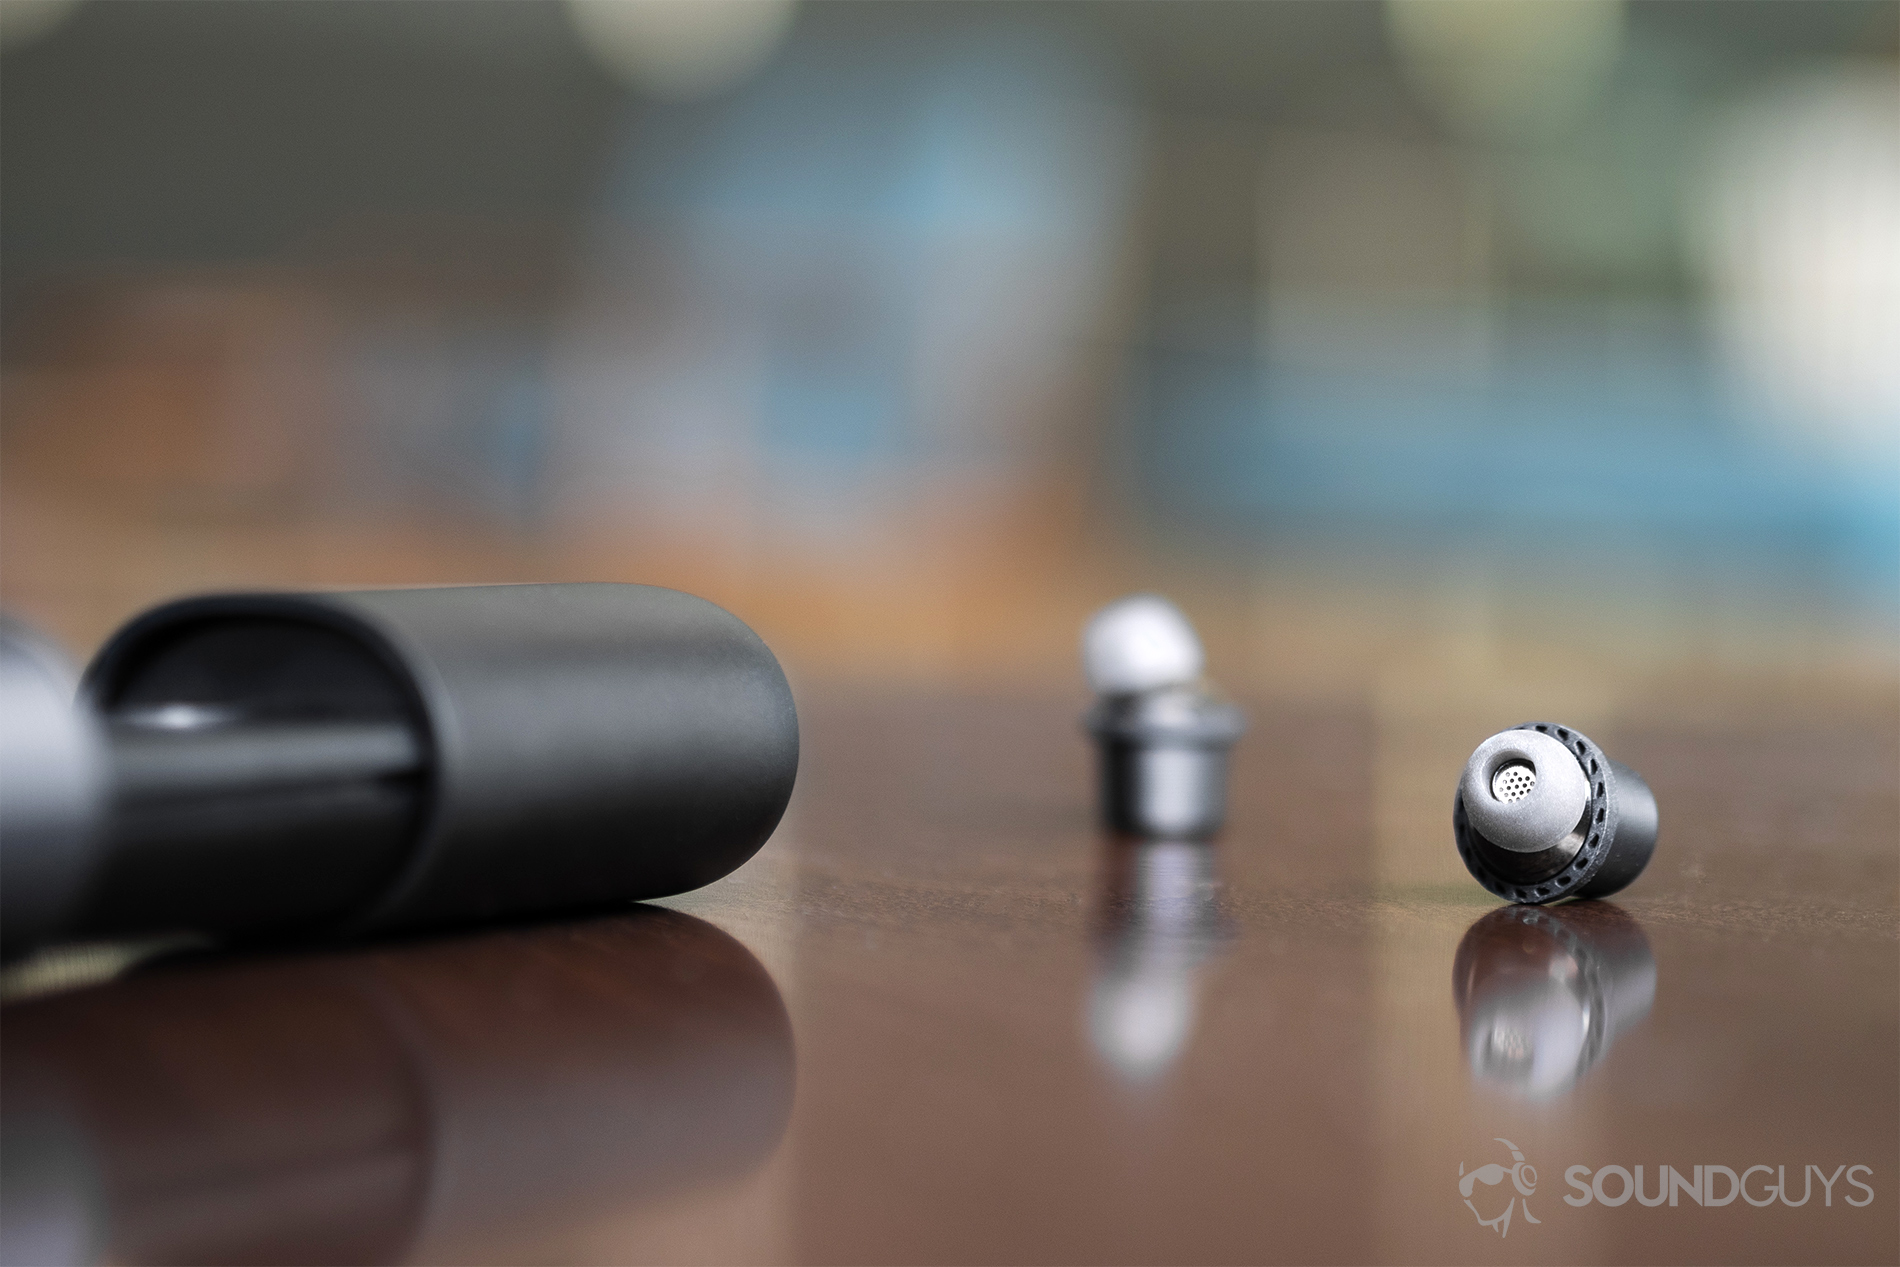 Rowkin Ascent Charge+ review: The earbuds on a wooden table with the charging case on middle-left of the image.